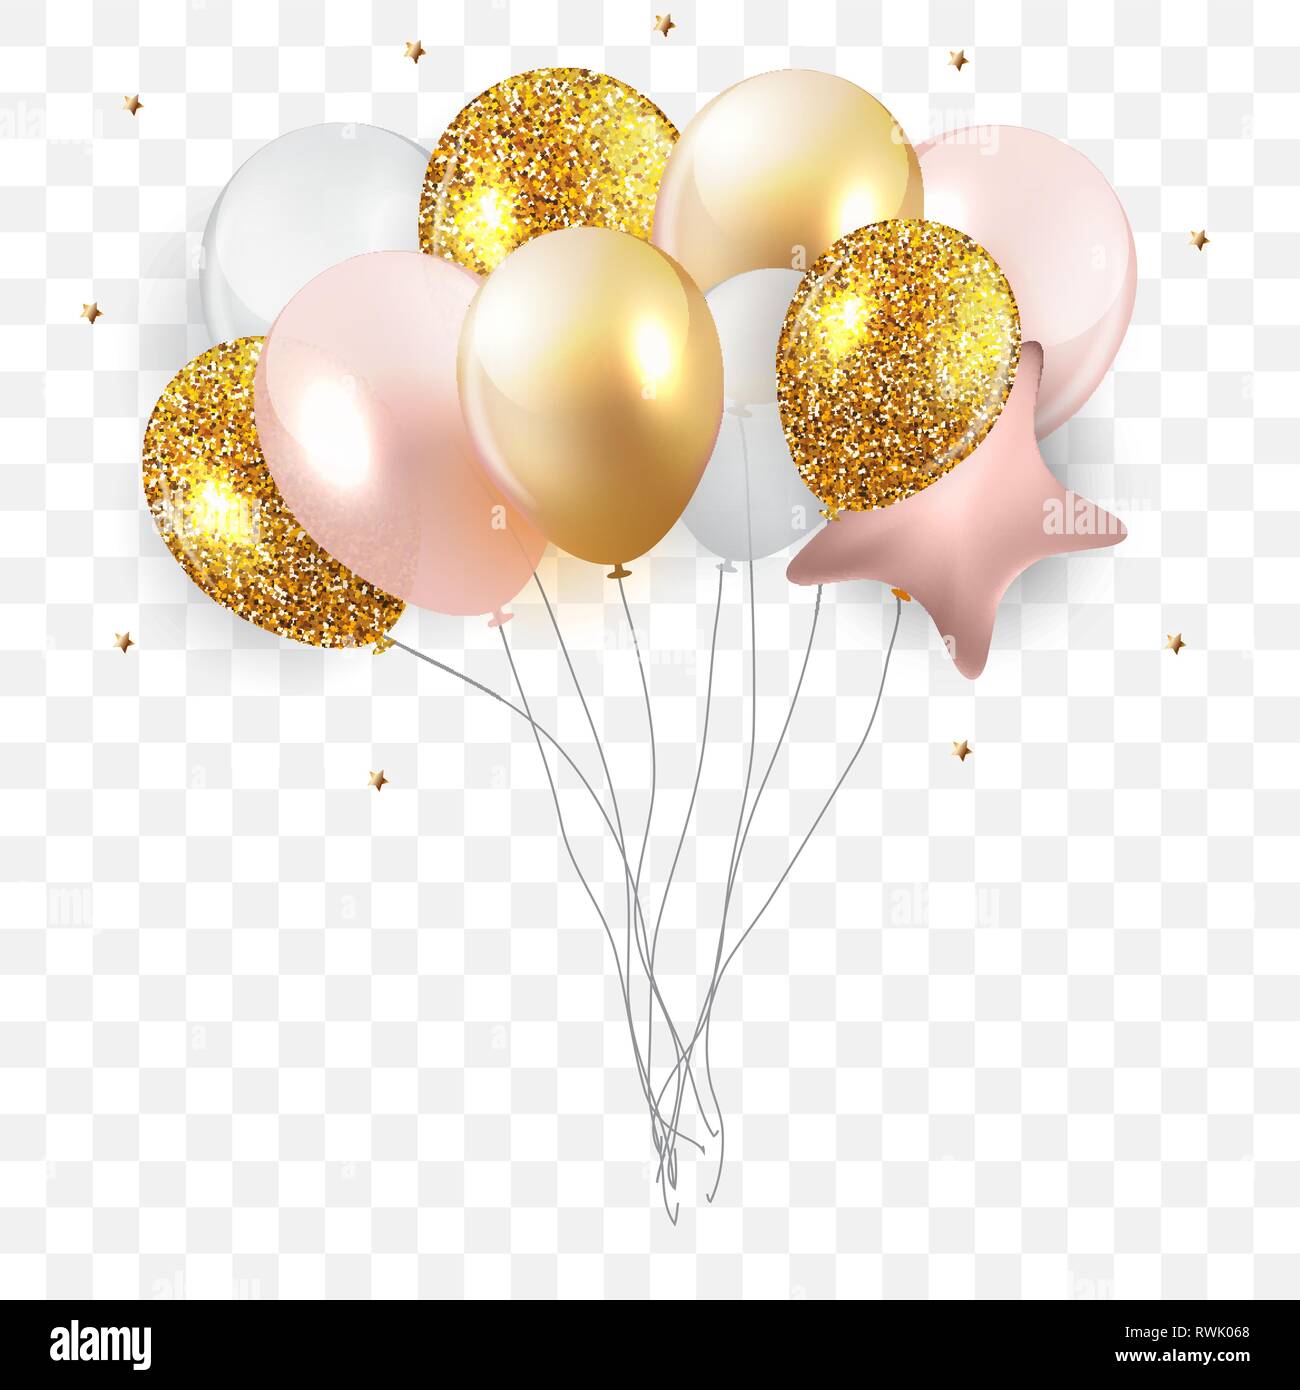 Download Glossy Happy Birthday Concept with Balloons isolated on ...